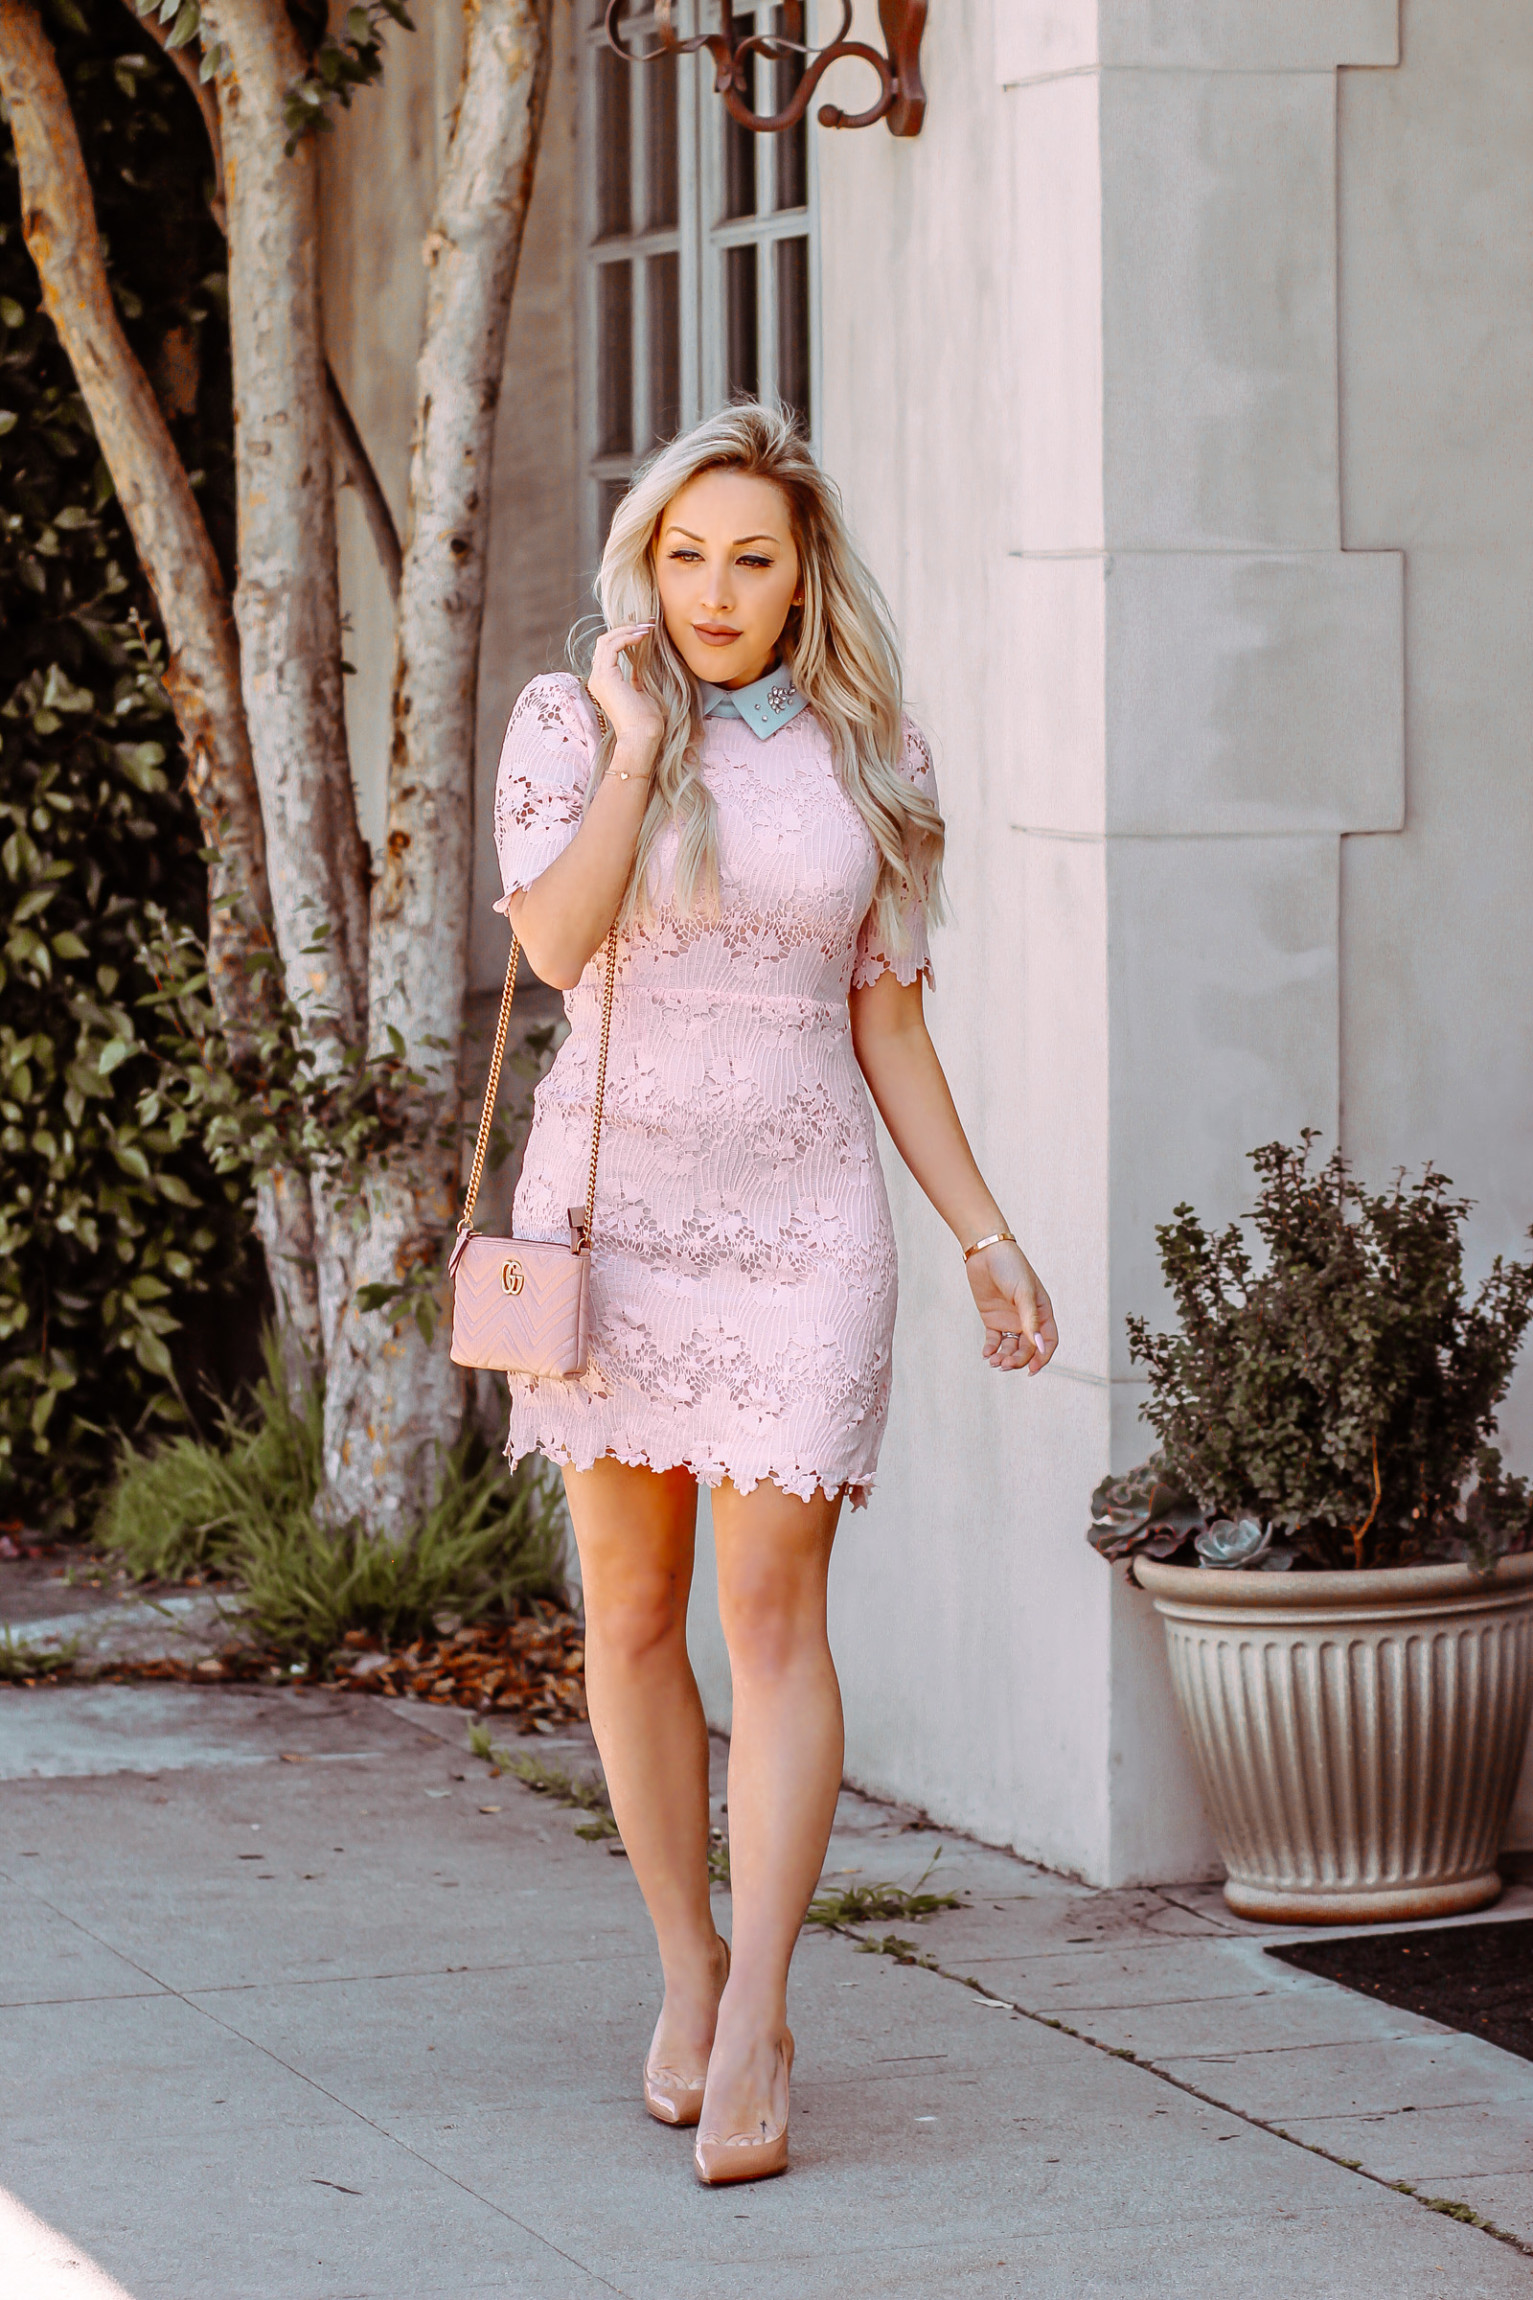 Easter Outfit Inspiration | Pastel Lace Dress | Blondie in the City by Hayley Larue